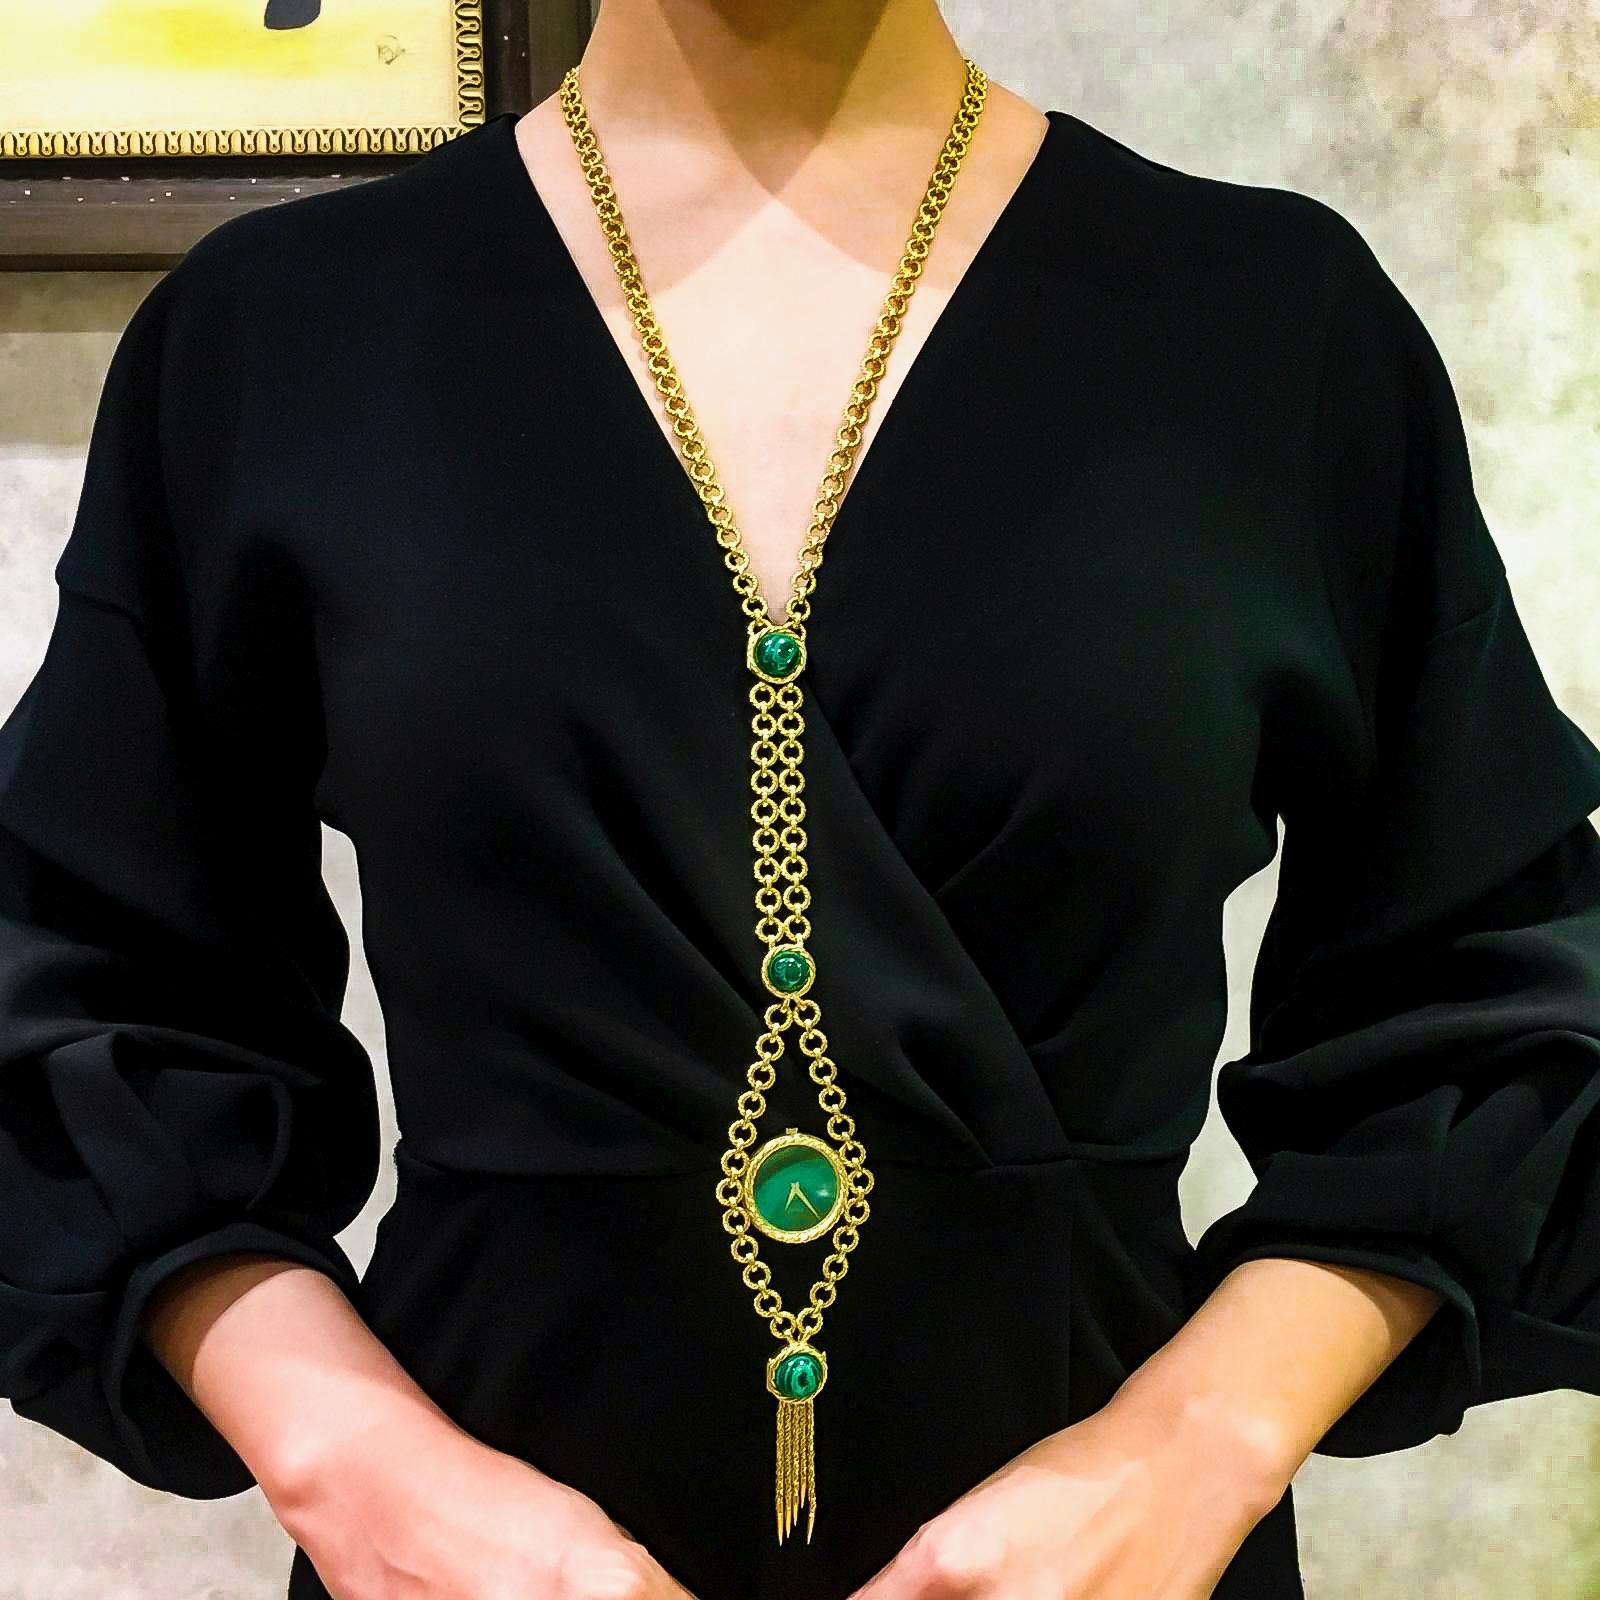 The present example is an extremely rare 18kt yellow gold Malachite Pendant watch which can be also be converted from a necklace into a bracelet to be worn as a malachite pendant watch. During the 1960s and 70s Piaget experimented with very unique